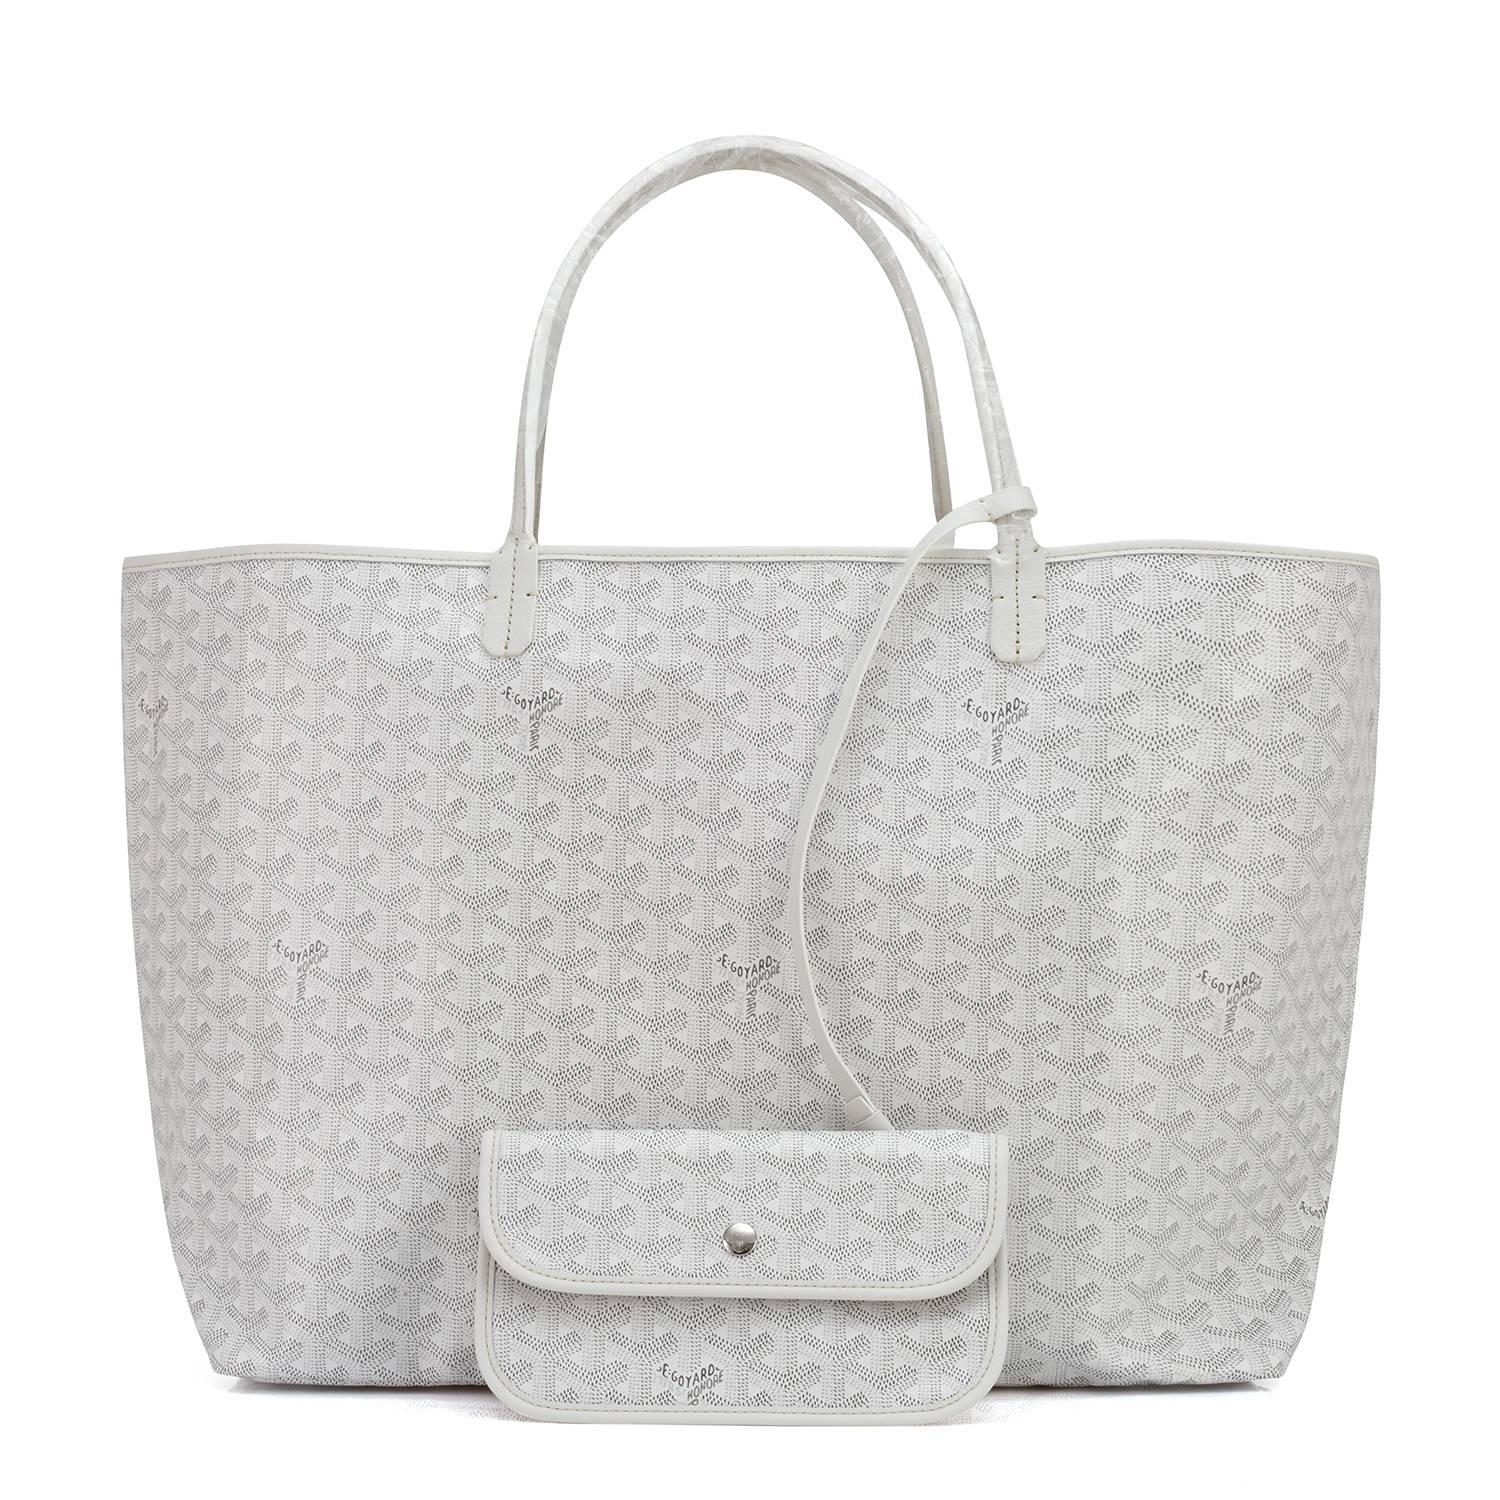 Goyard White St Louis GM Chevron Leather Canvas Tote Bag NEW Gift For Sale 1